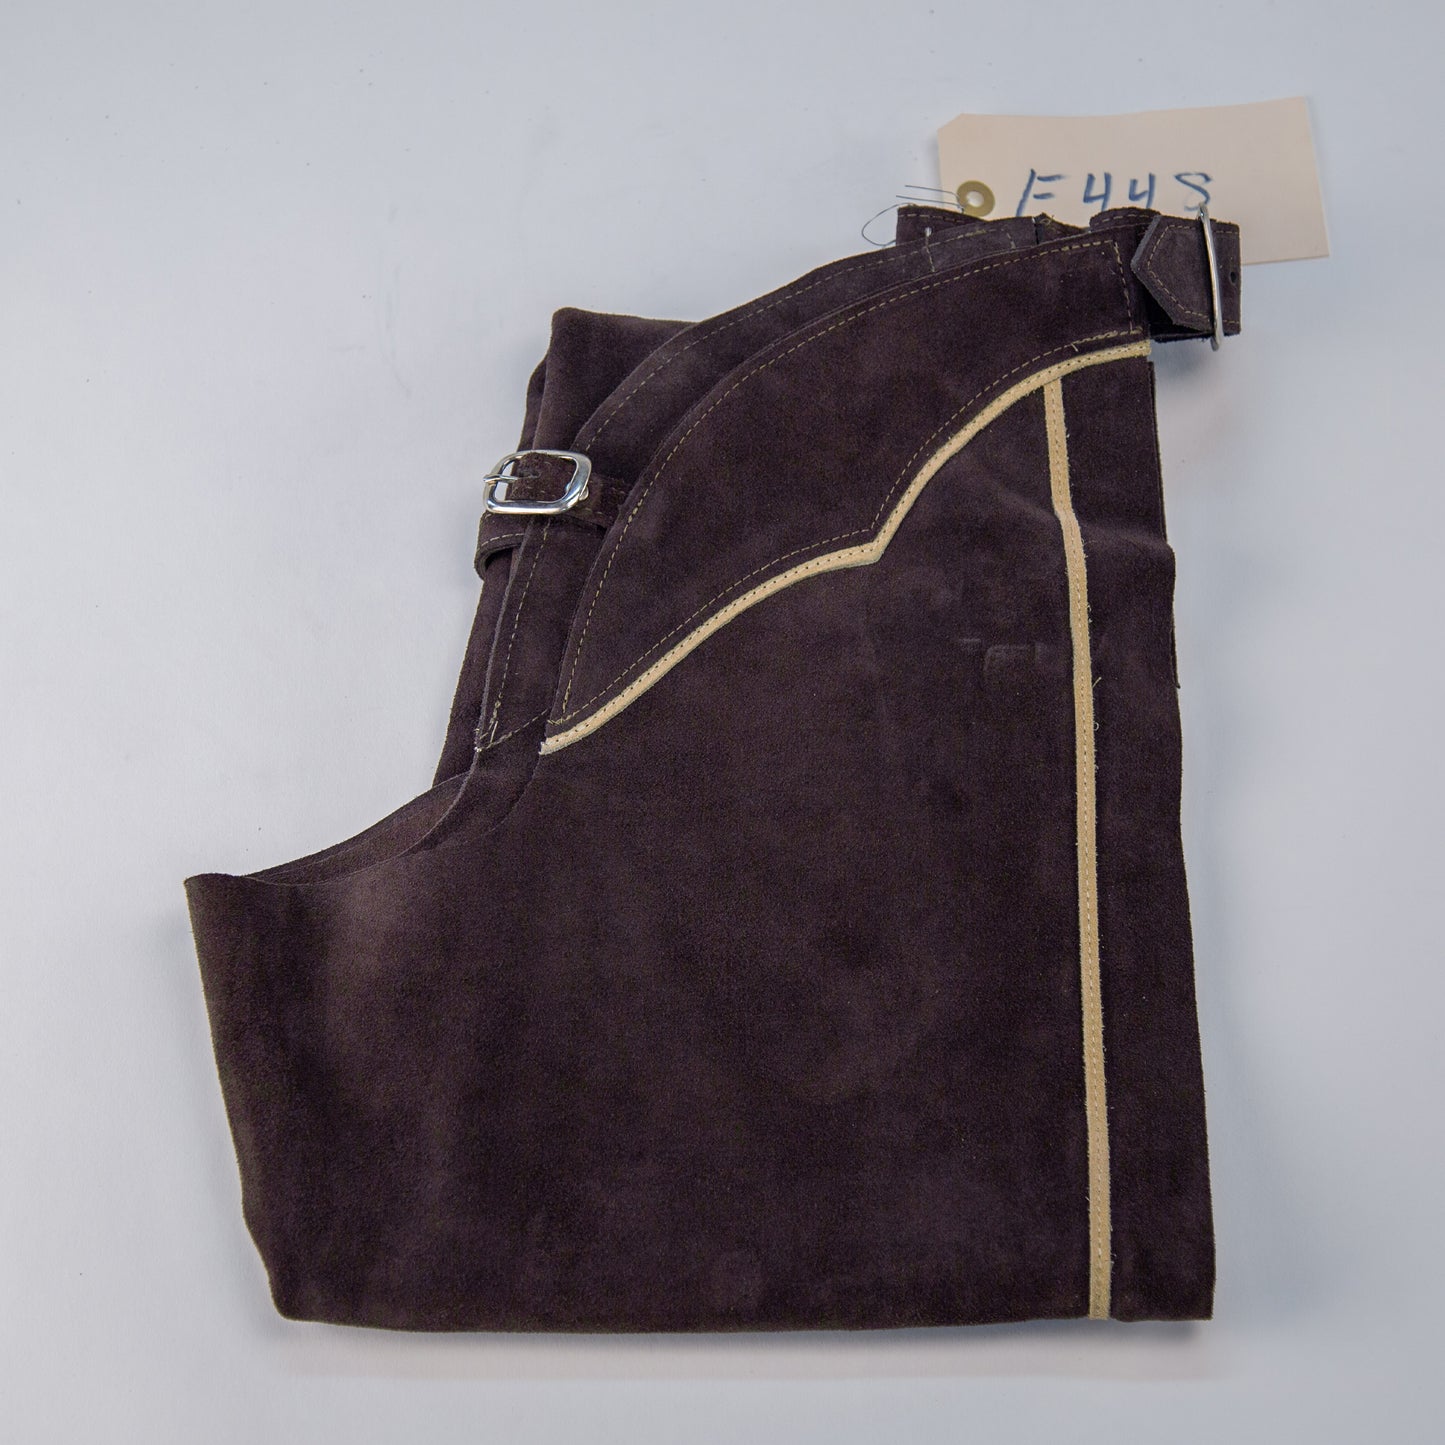 English Schooling Chaps - Brown Suede - Sand Stripe